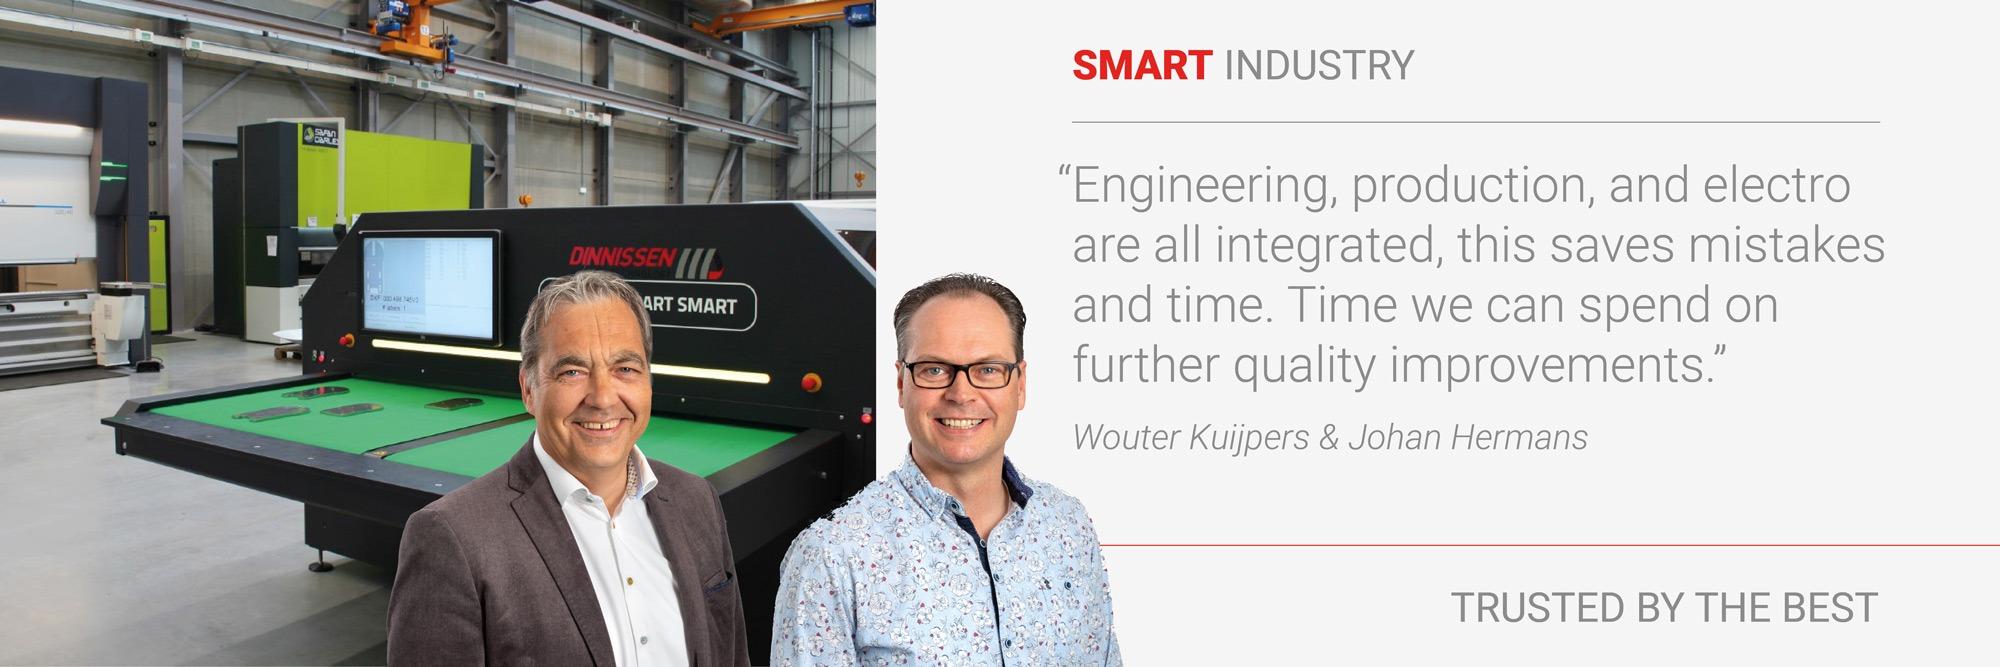 Smart Industry special - quote Johan and Wouter